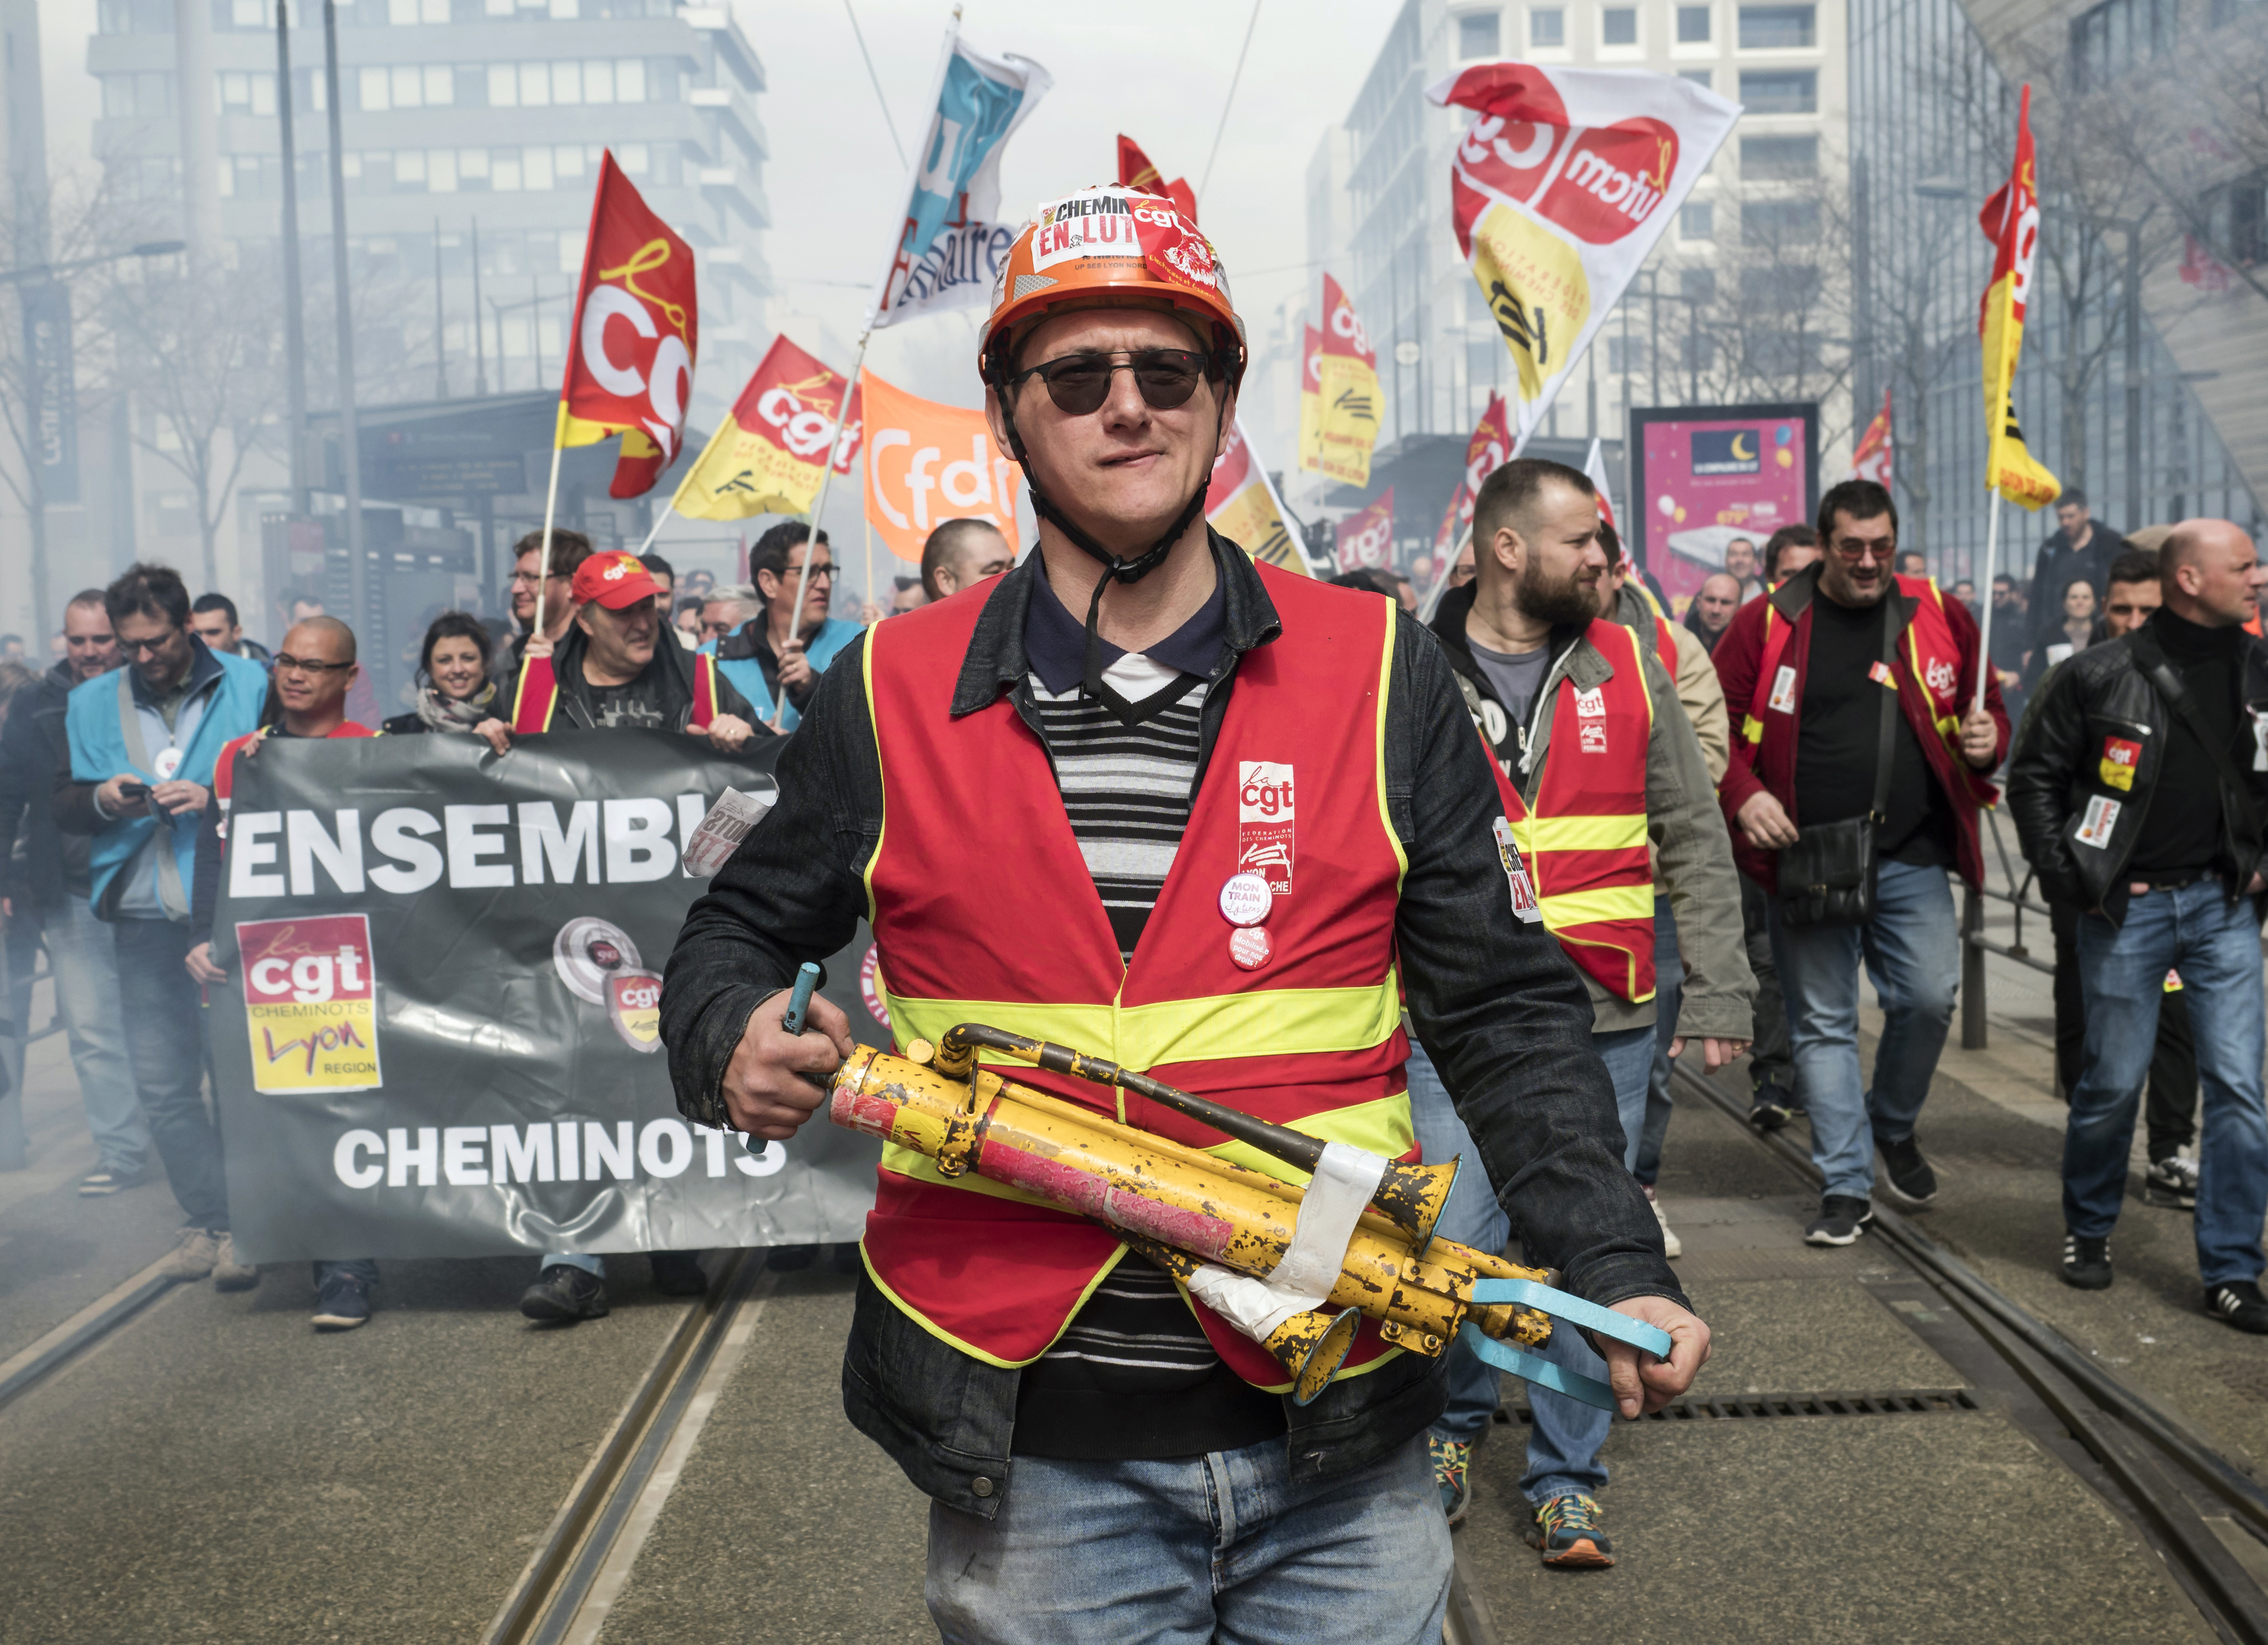 French rail workers demonstrate in Lyon, central France, Tuesday, April 3, 2018. French unions plan strikes two days every week through June to protest government plans to eliminate some rail worker benefits — part of broader European plans to open national railways to competition. (AP Photo/Laurent Cipriani)